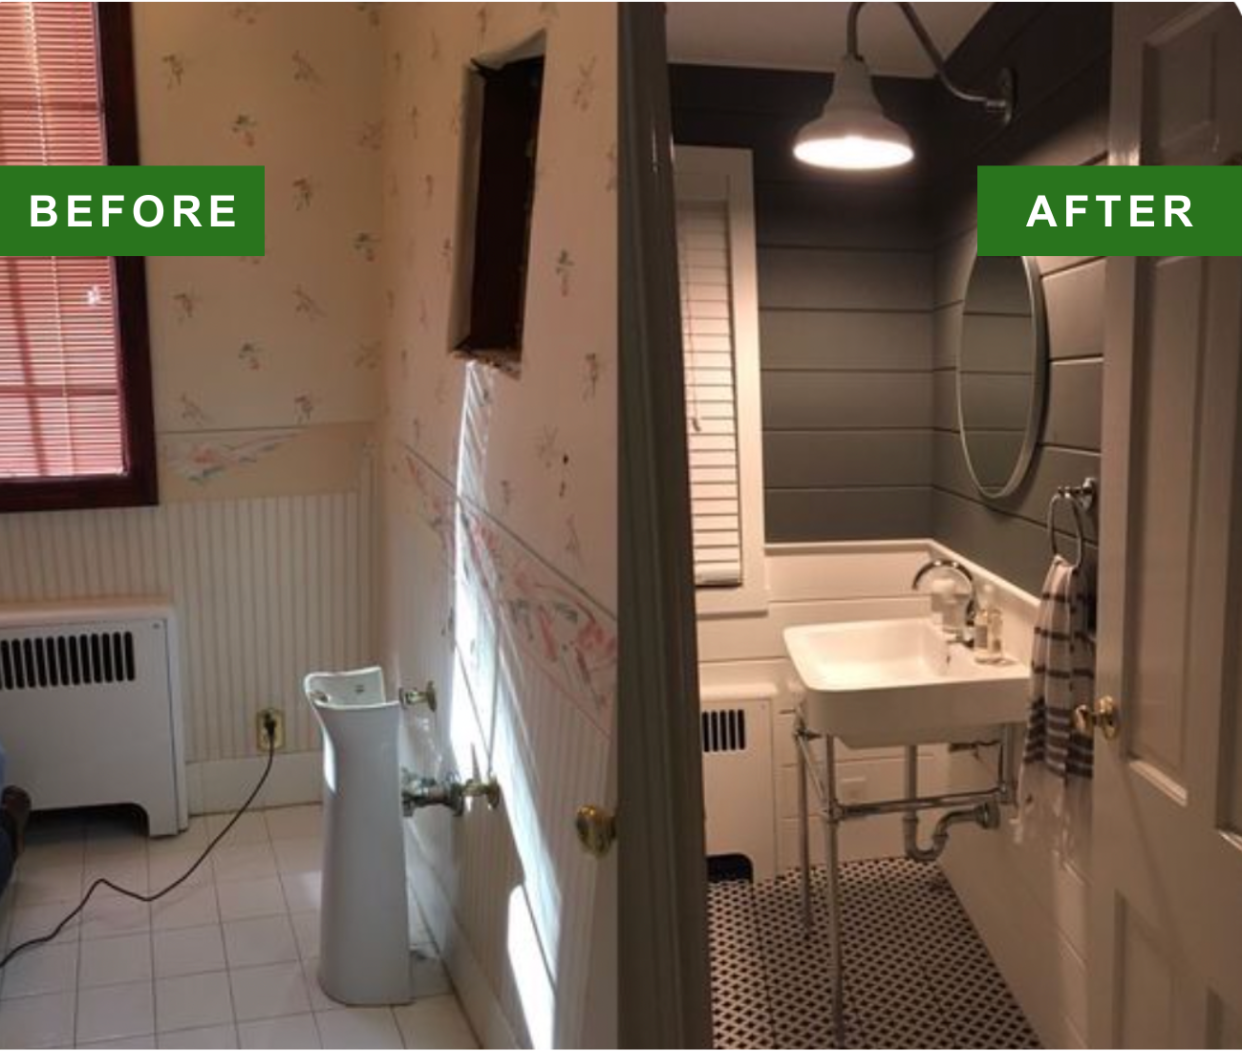 A before and after comparison of a remodeled bathroom.